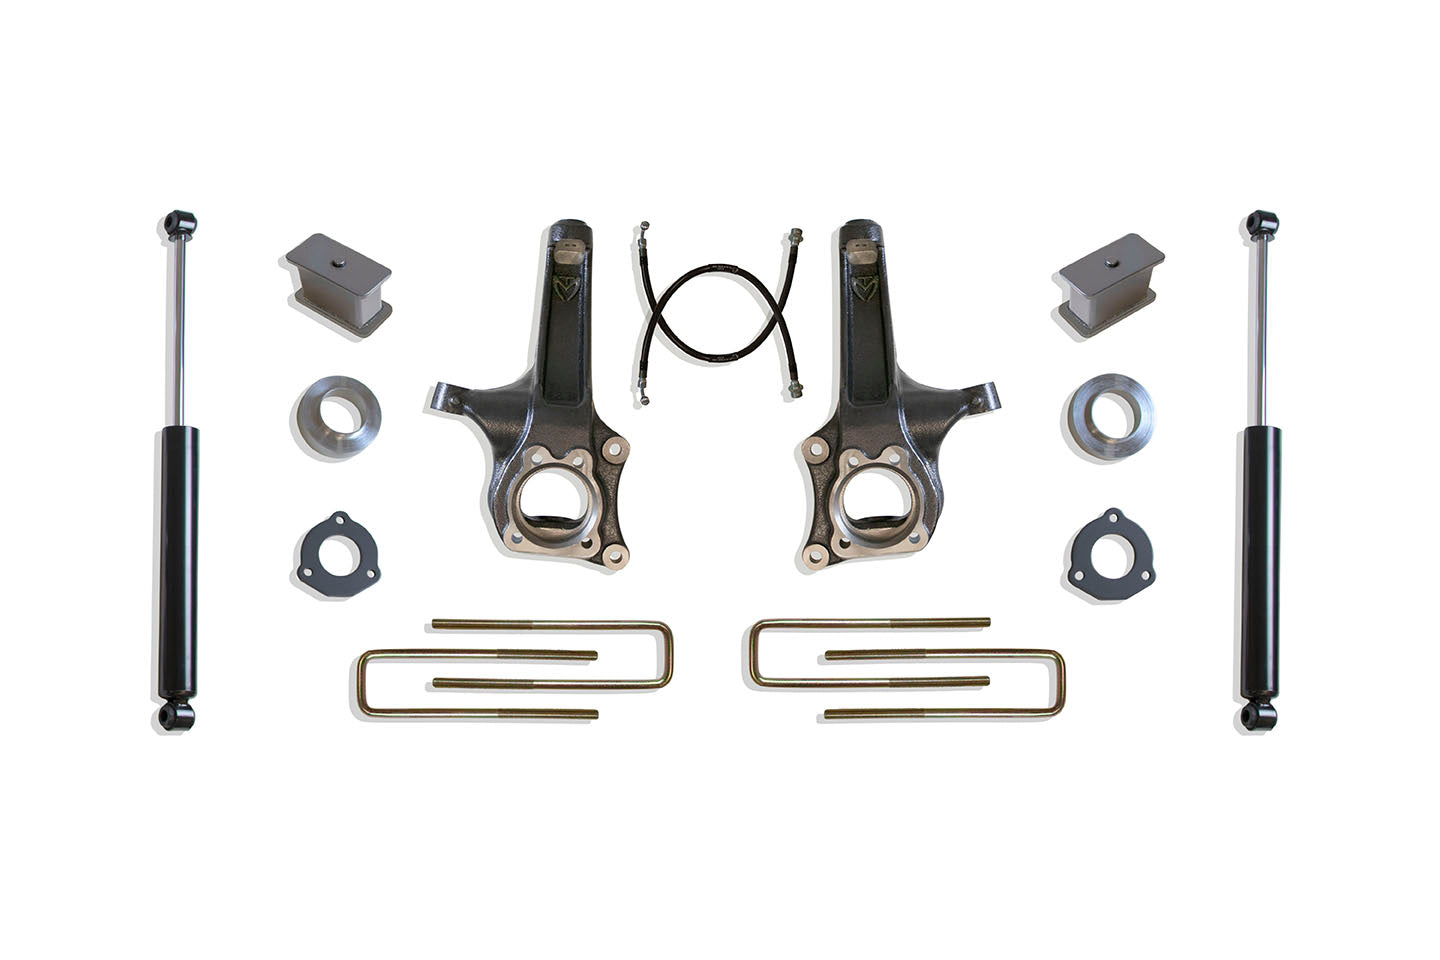 MaxTrac Suspension 2WD 6.5" Lift Kit Including Spindles Spacers Extended Brake Lines Blocks U-Bolts & Rear Max Trac Shocks K880463